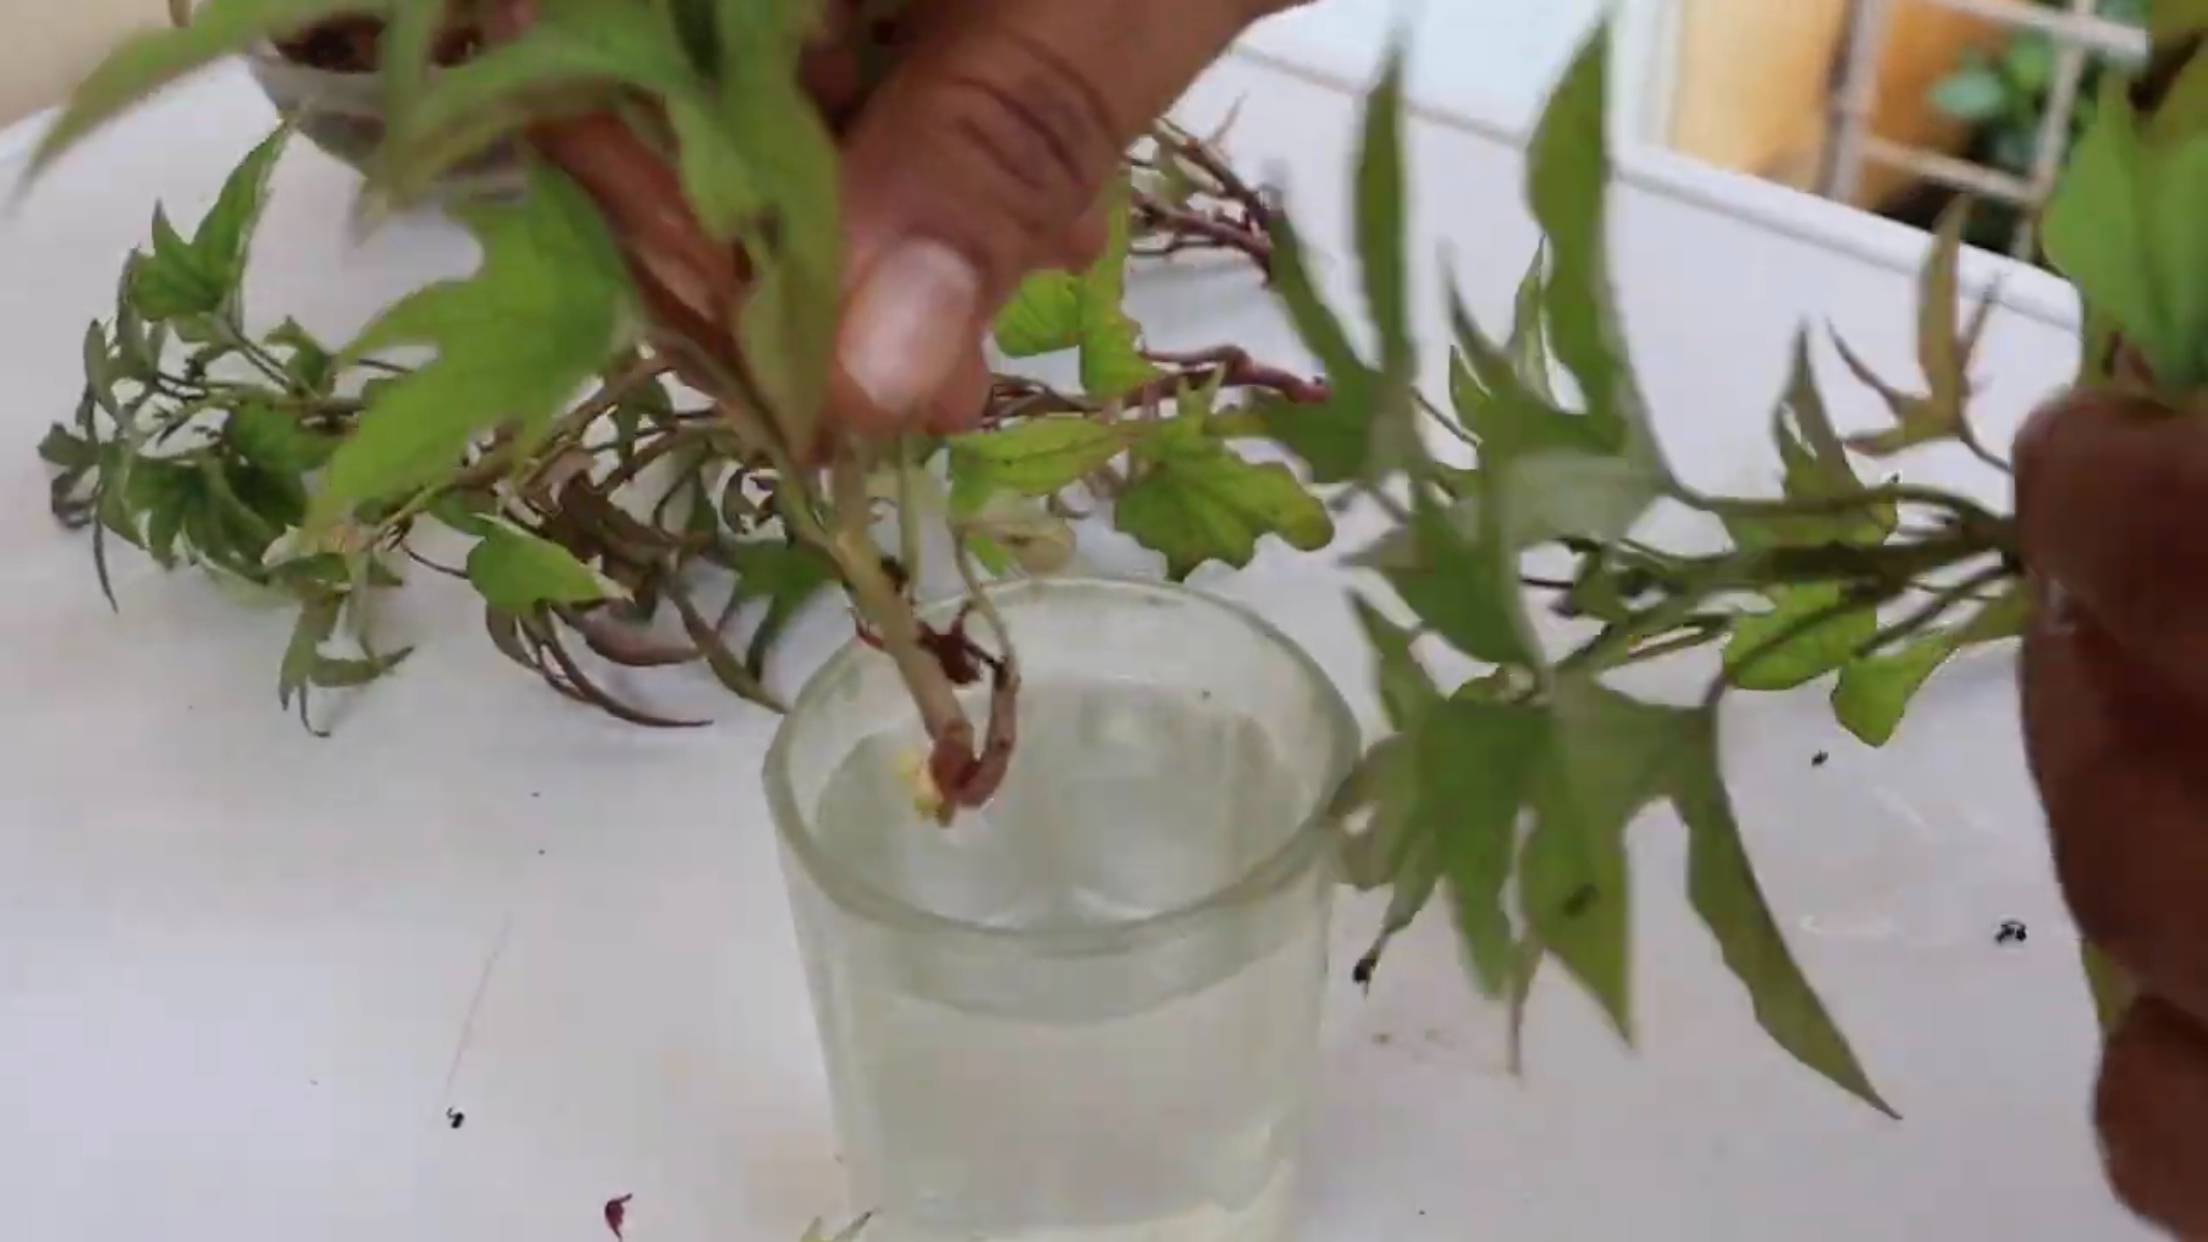 Germinate shoots in a glass of water